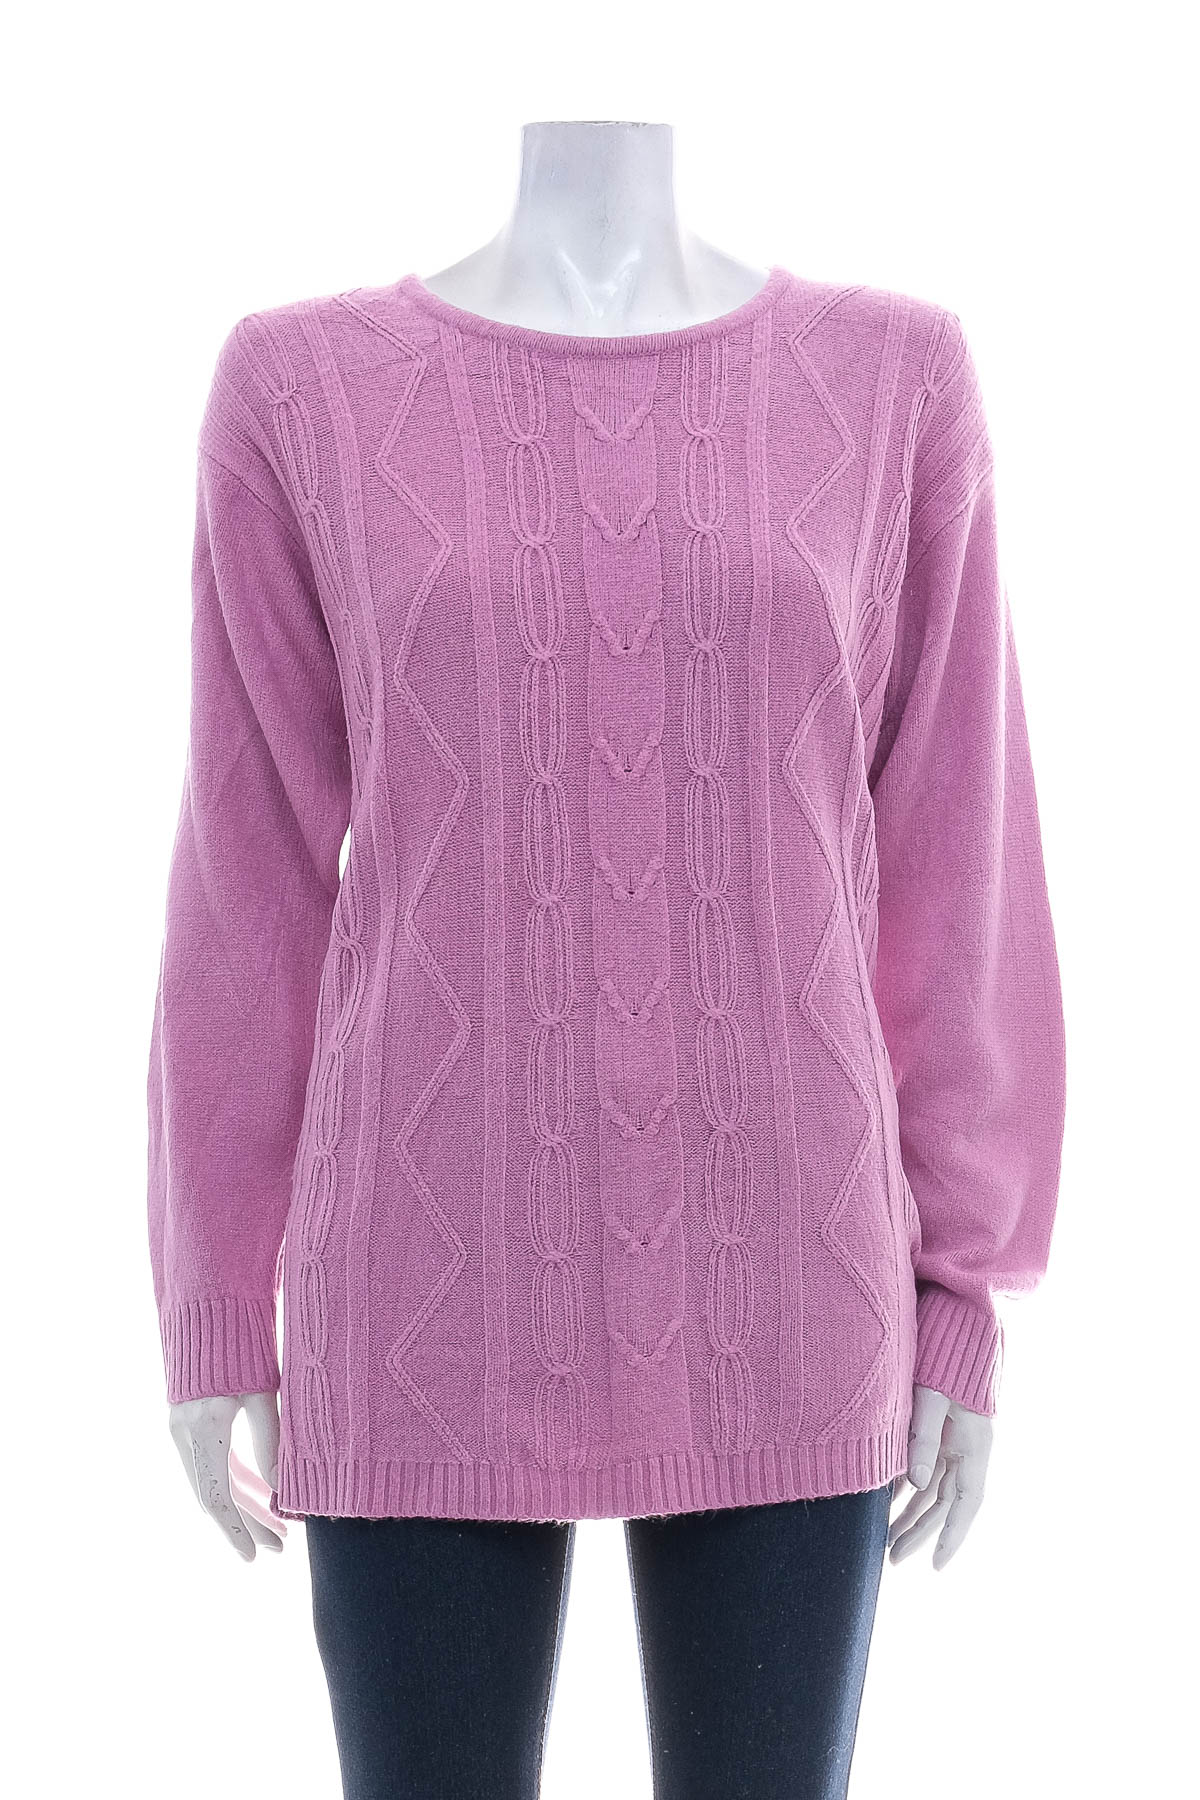 Women's sweater - Paramour - 0